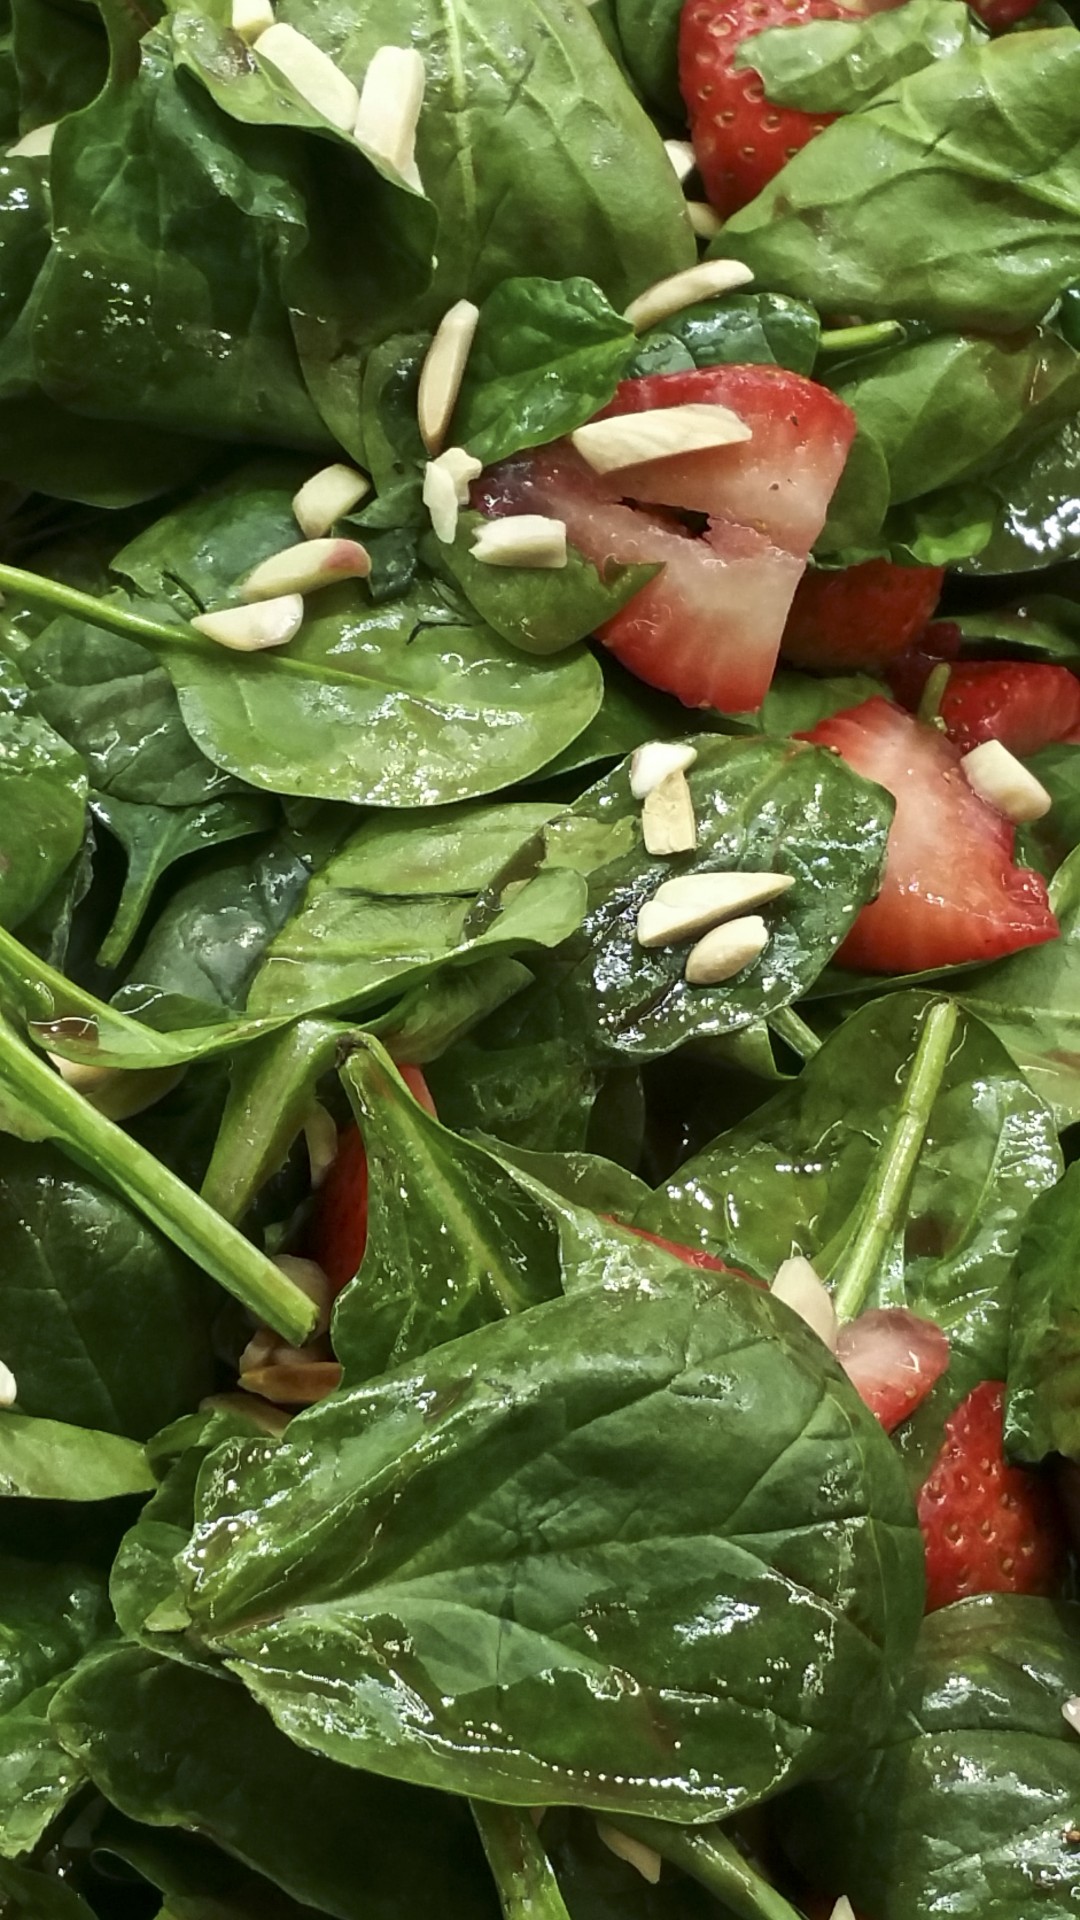 Spinach Salad With Strawberry Vinaigrette